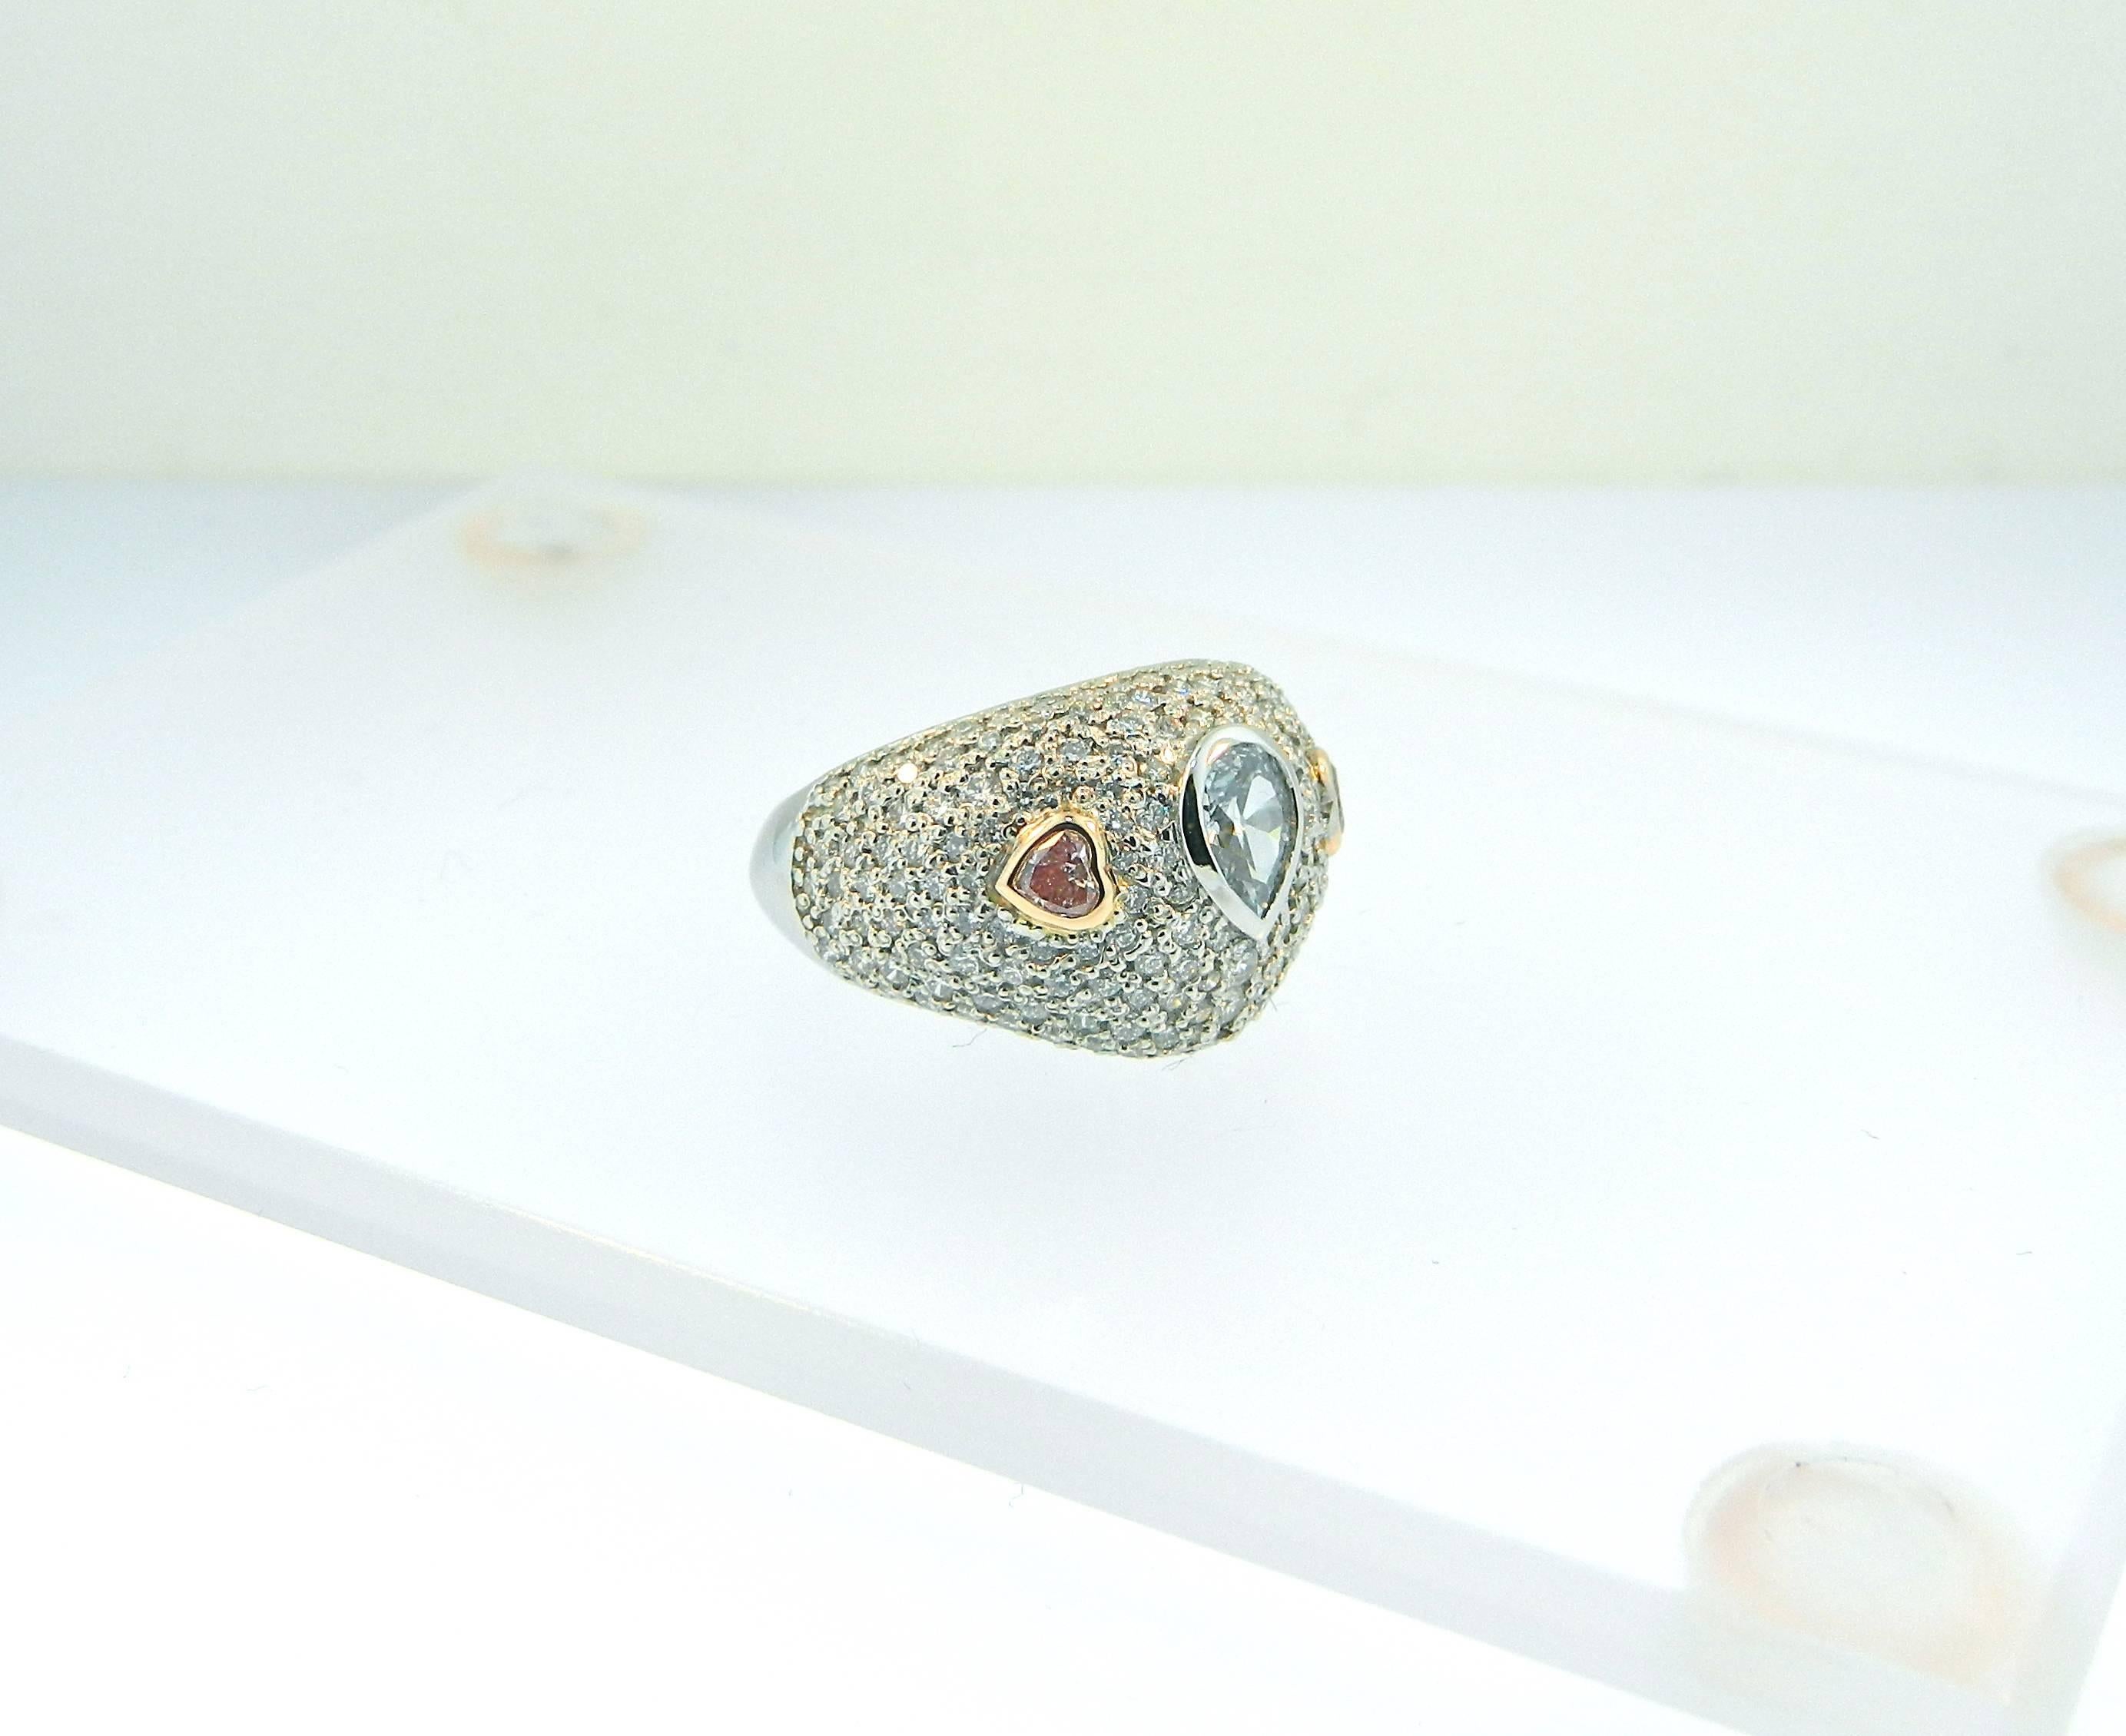 A rare and stunning GIA Certified .54ct Fancy Light Gray-Blue VS2 antique pear shape diamond accented by two natural fancy pink hear shape diamonds.  Mounted in a pave' set platinum and diamond ring.